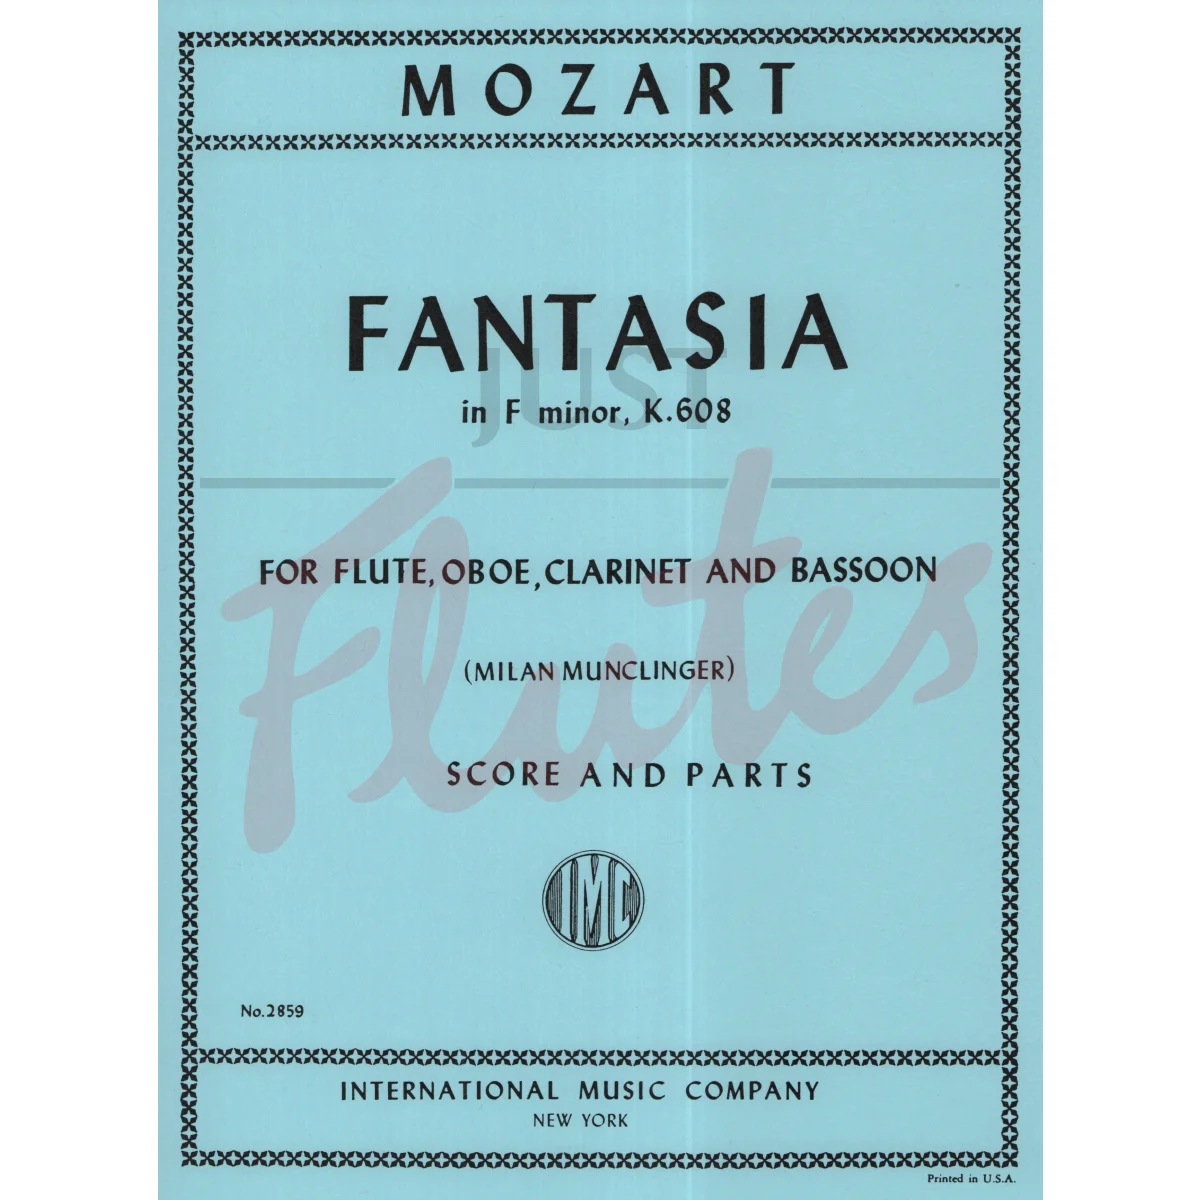 Fantasia in F minor for Flute, Oboe, Clarinet and Bassoon